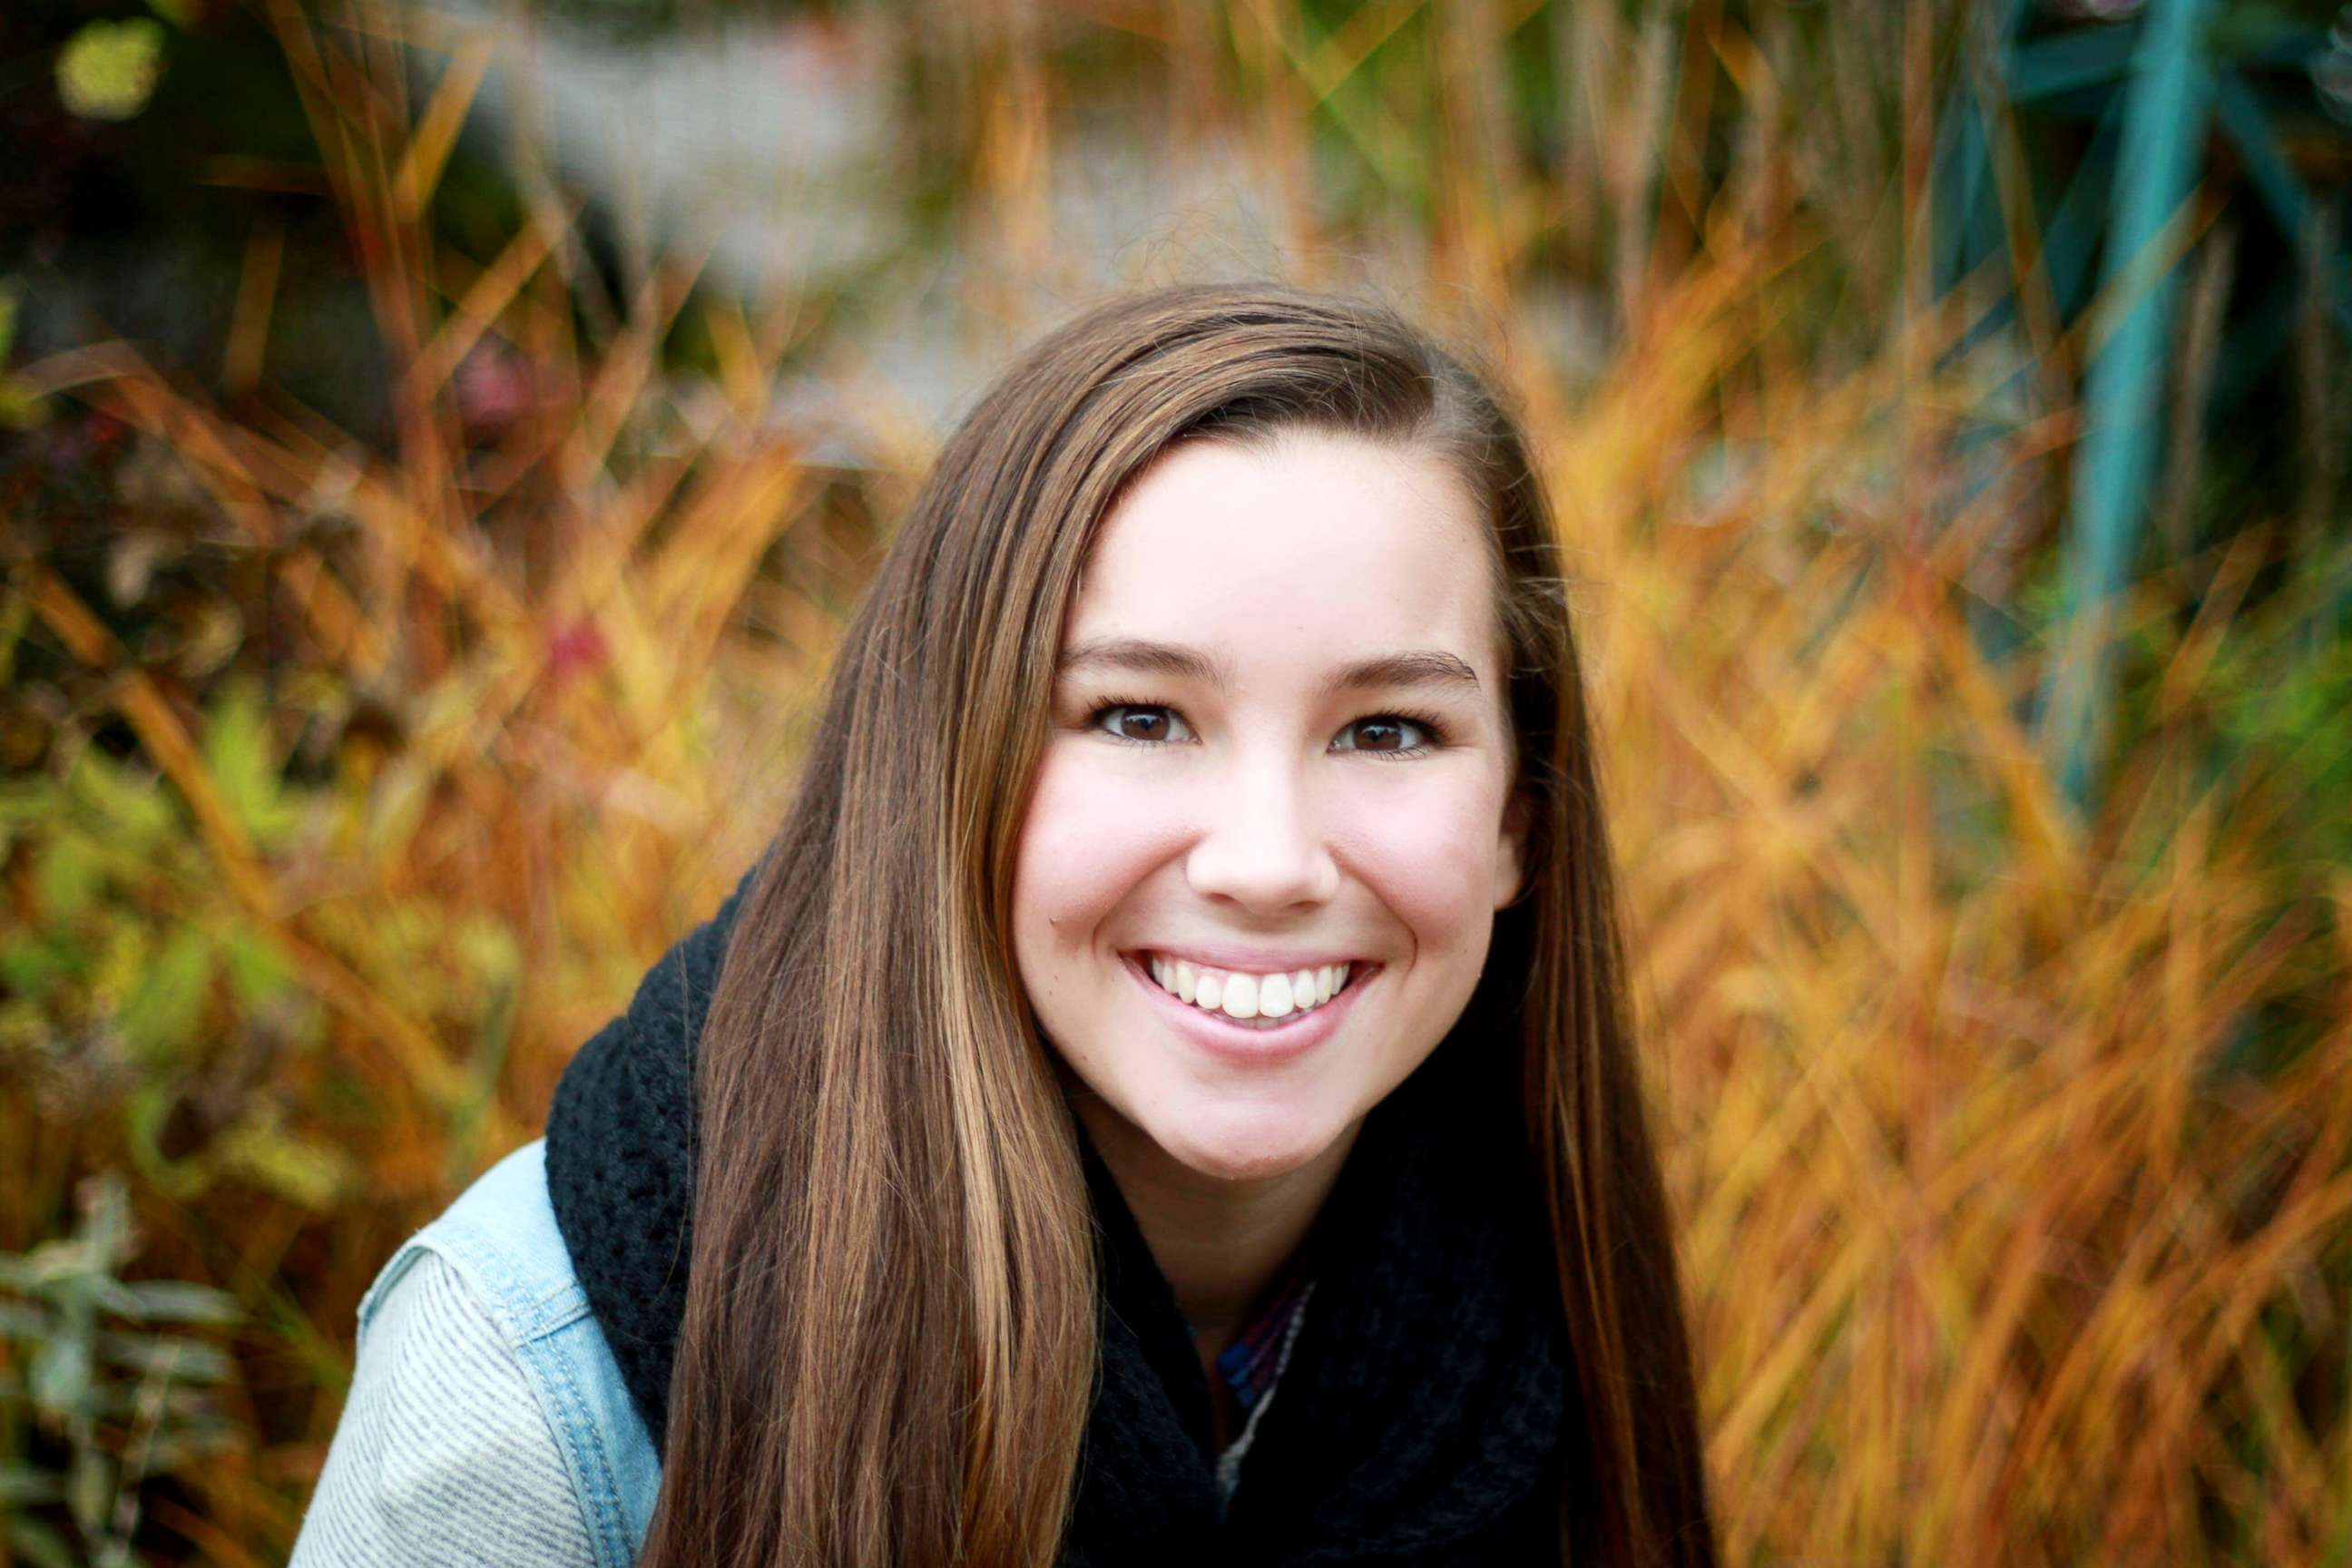 PHOTO: Mollie Tibbetts is seen here in this undated file photo.